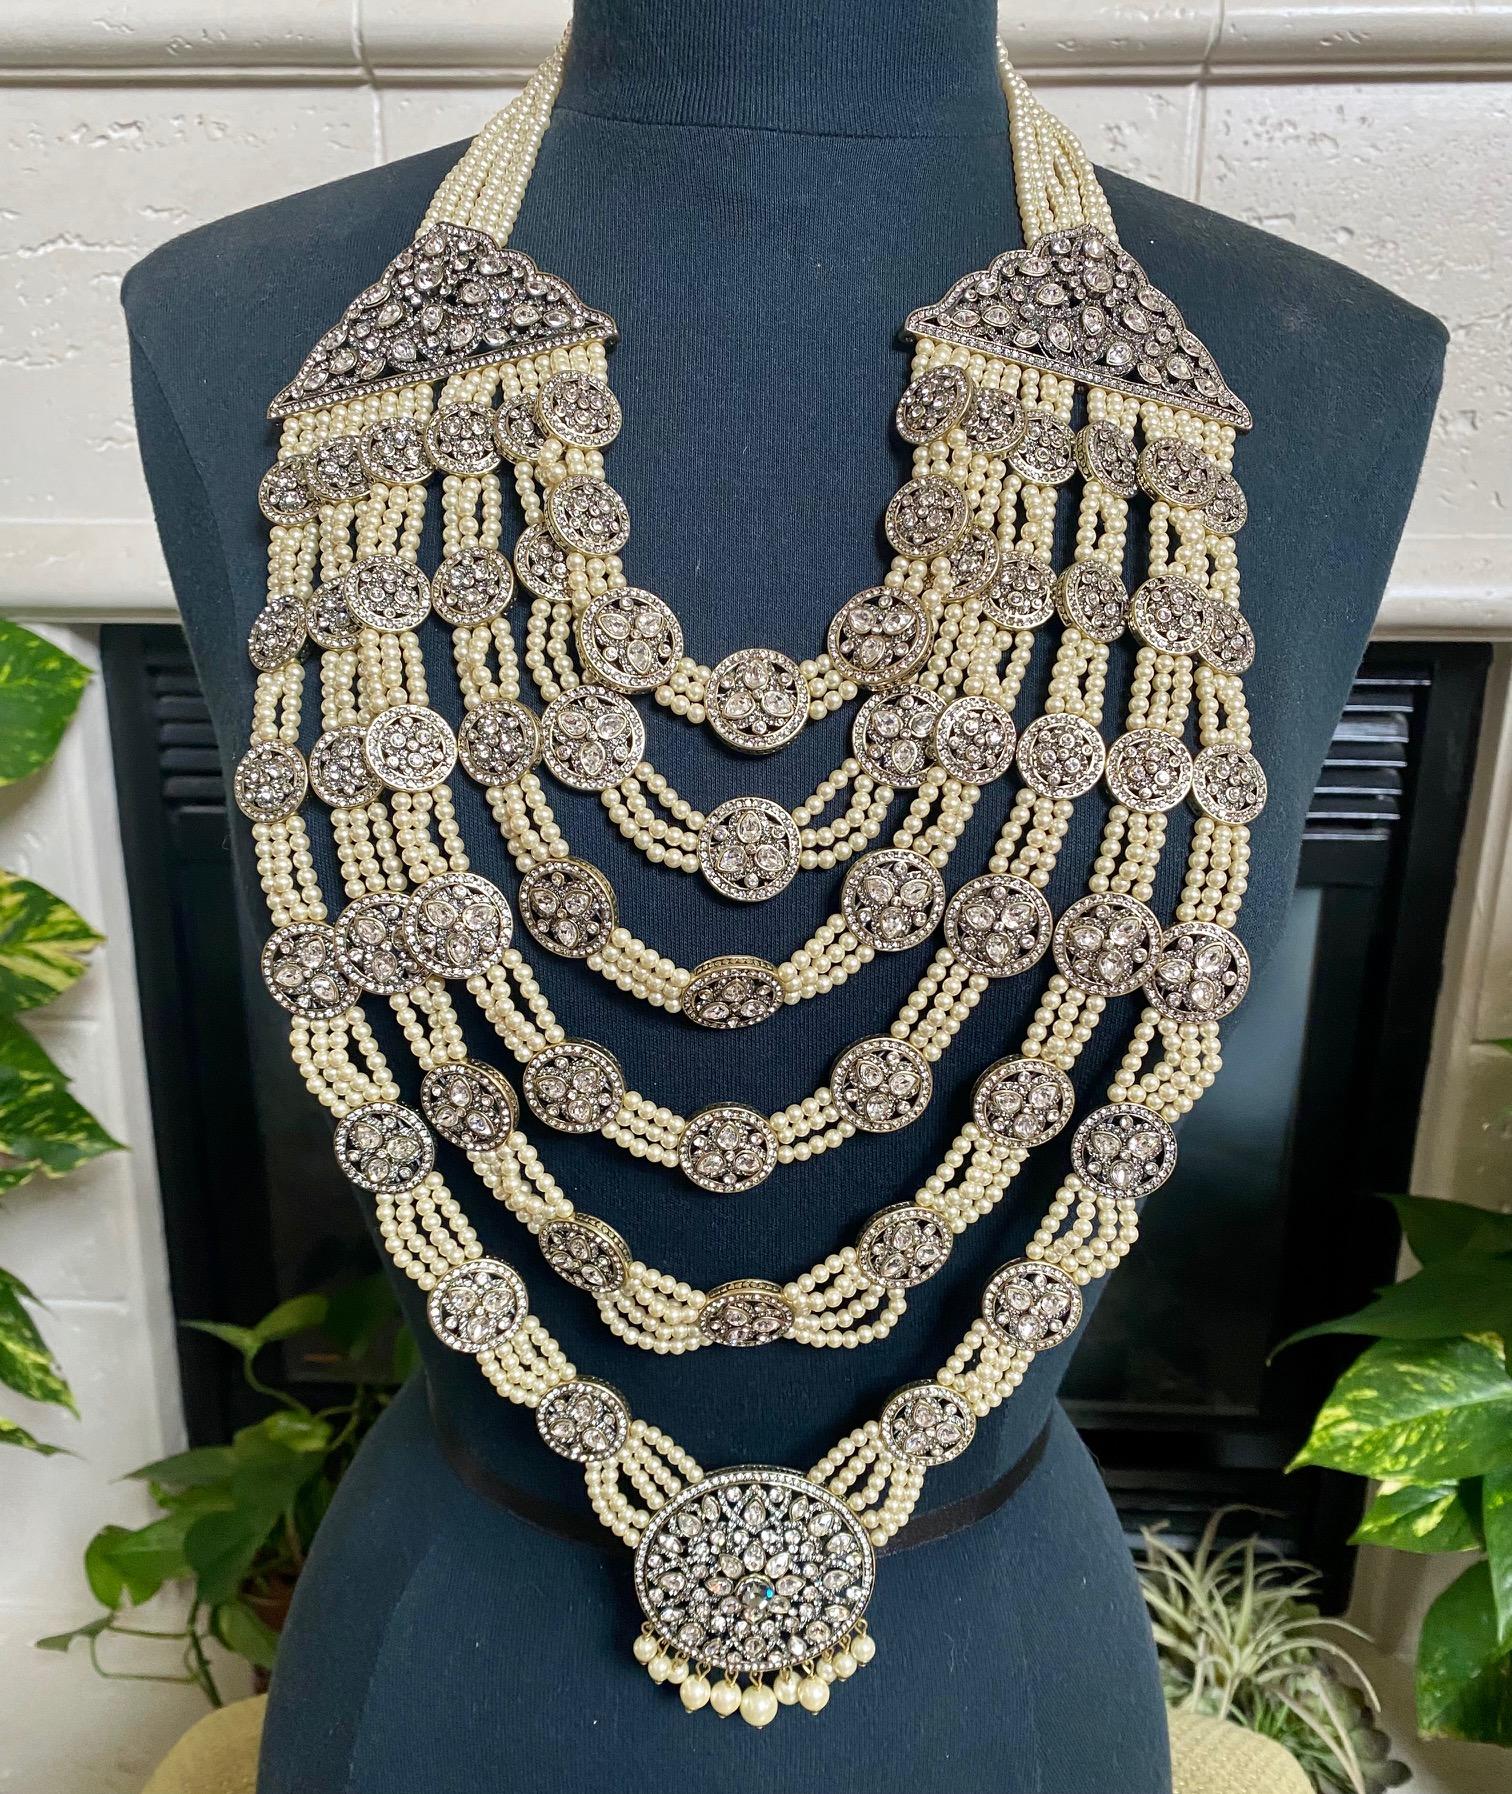 Showstopper Statement 5 Strand Necklace, a piece of art. Great for Weddings, Actors & Special Events

WOW! Release your inner goddess with this breathtaking India inspired drop bib statement necklace.
5 strands 6 mm white glass pearls are linked